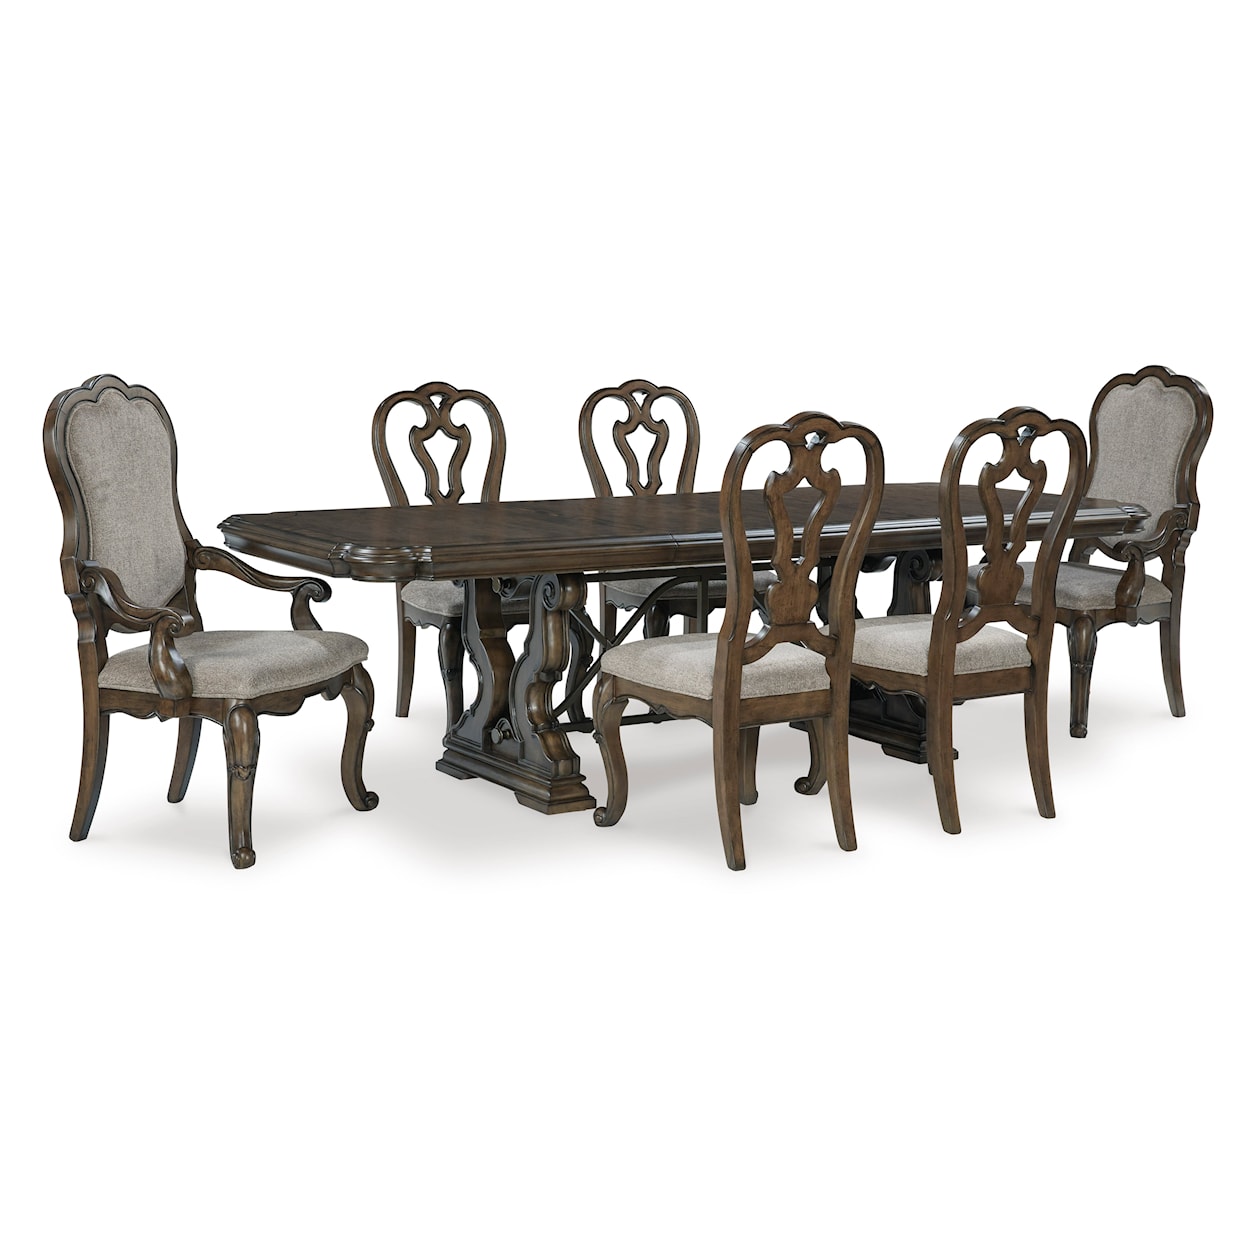 Signature Design by Ashley Furniture Maylee 6-Piece Dining Set